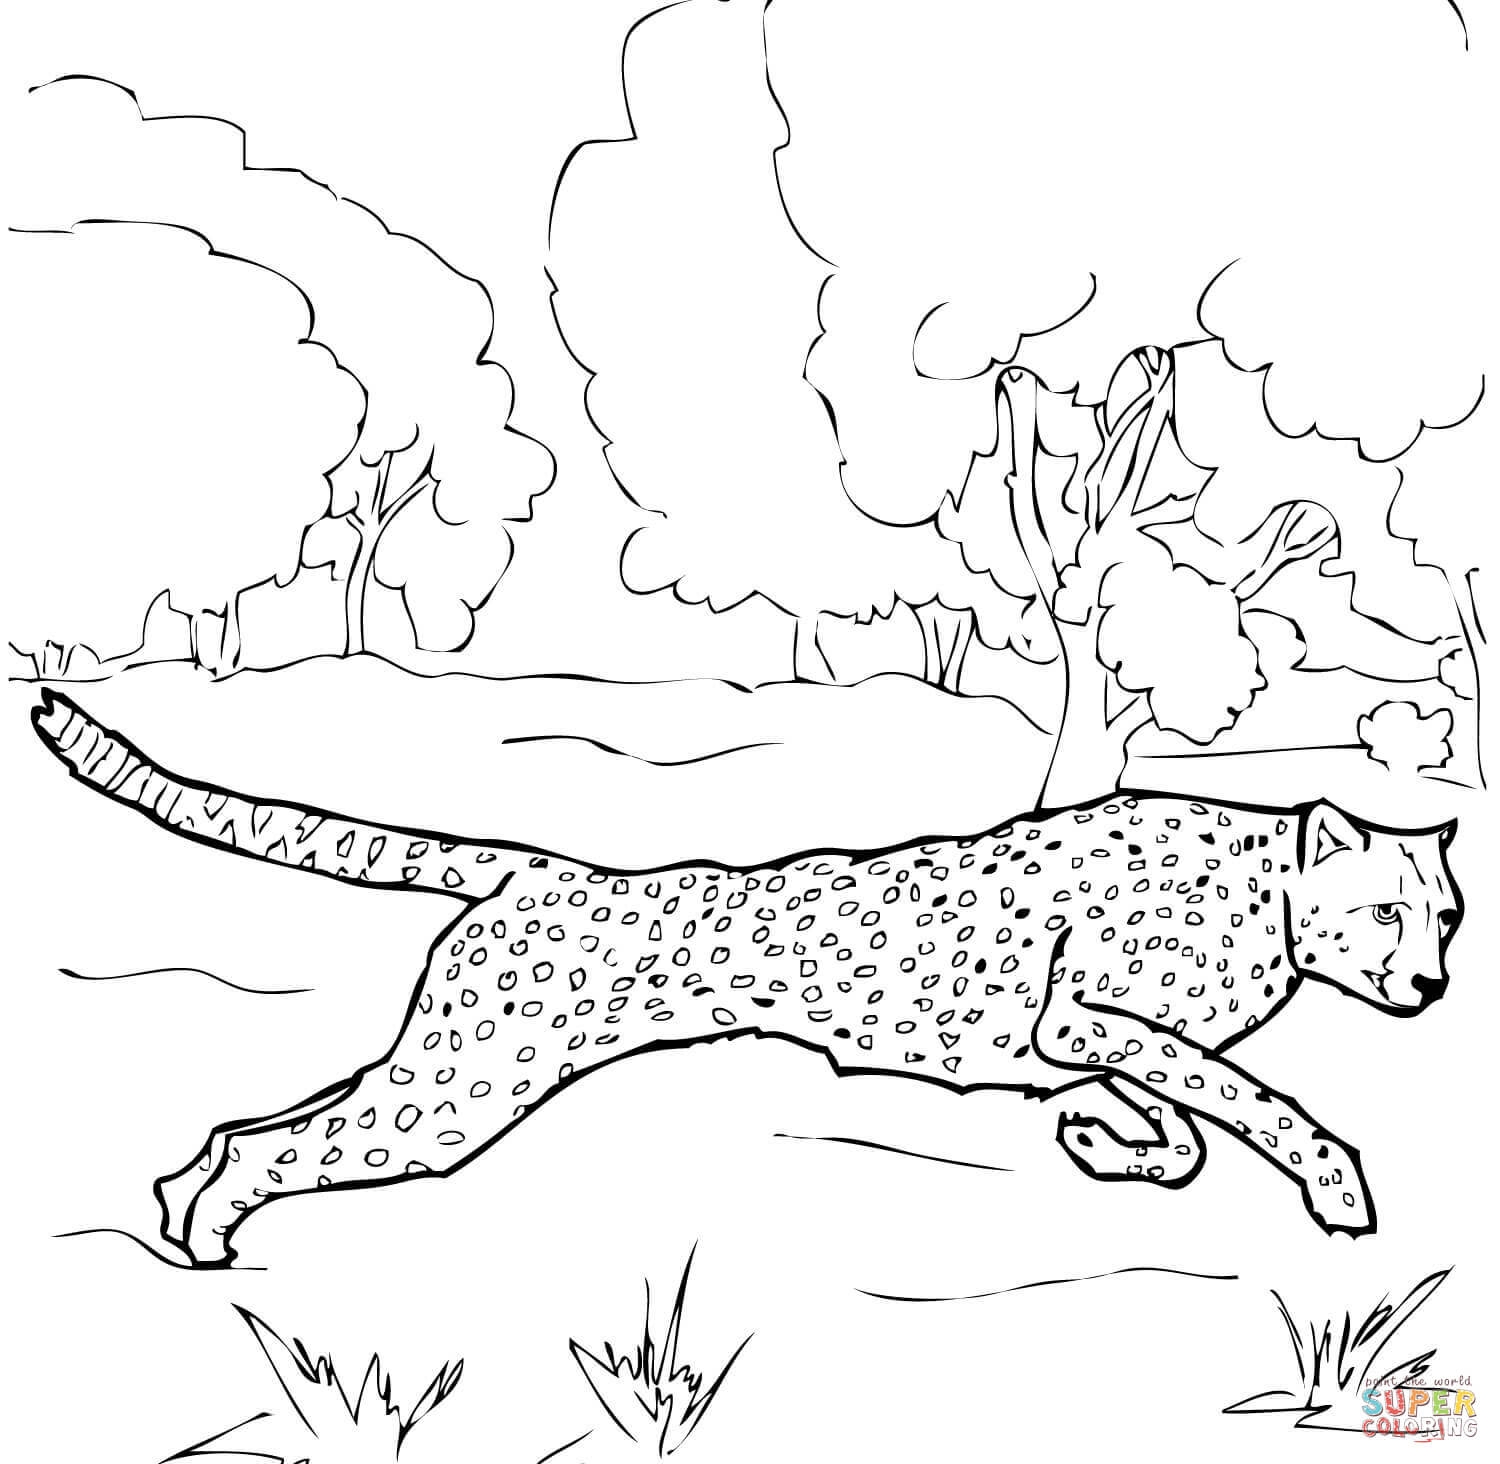 Ocelot Coloring Page at GetDrawings | Free download